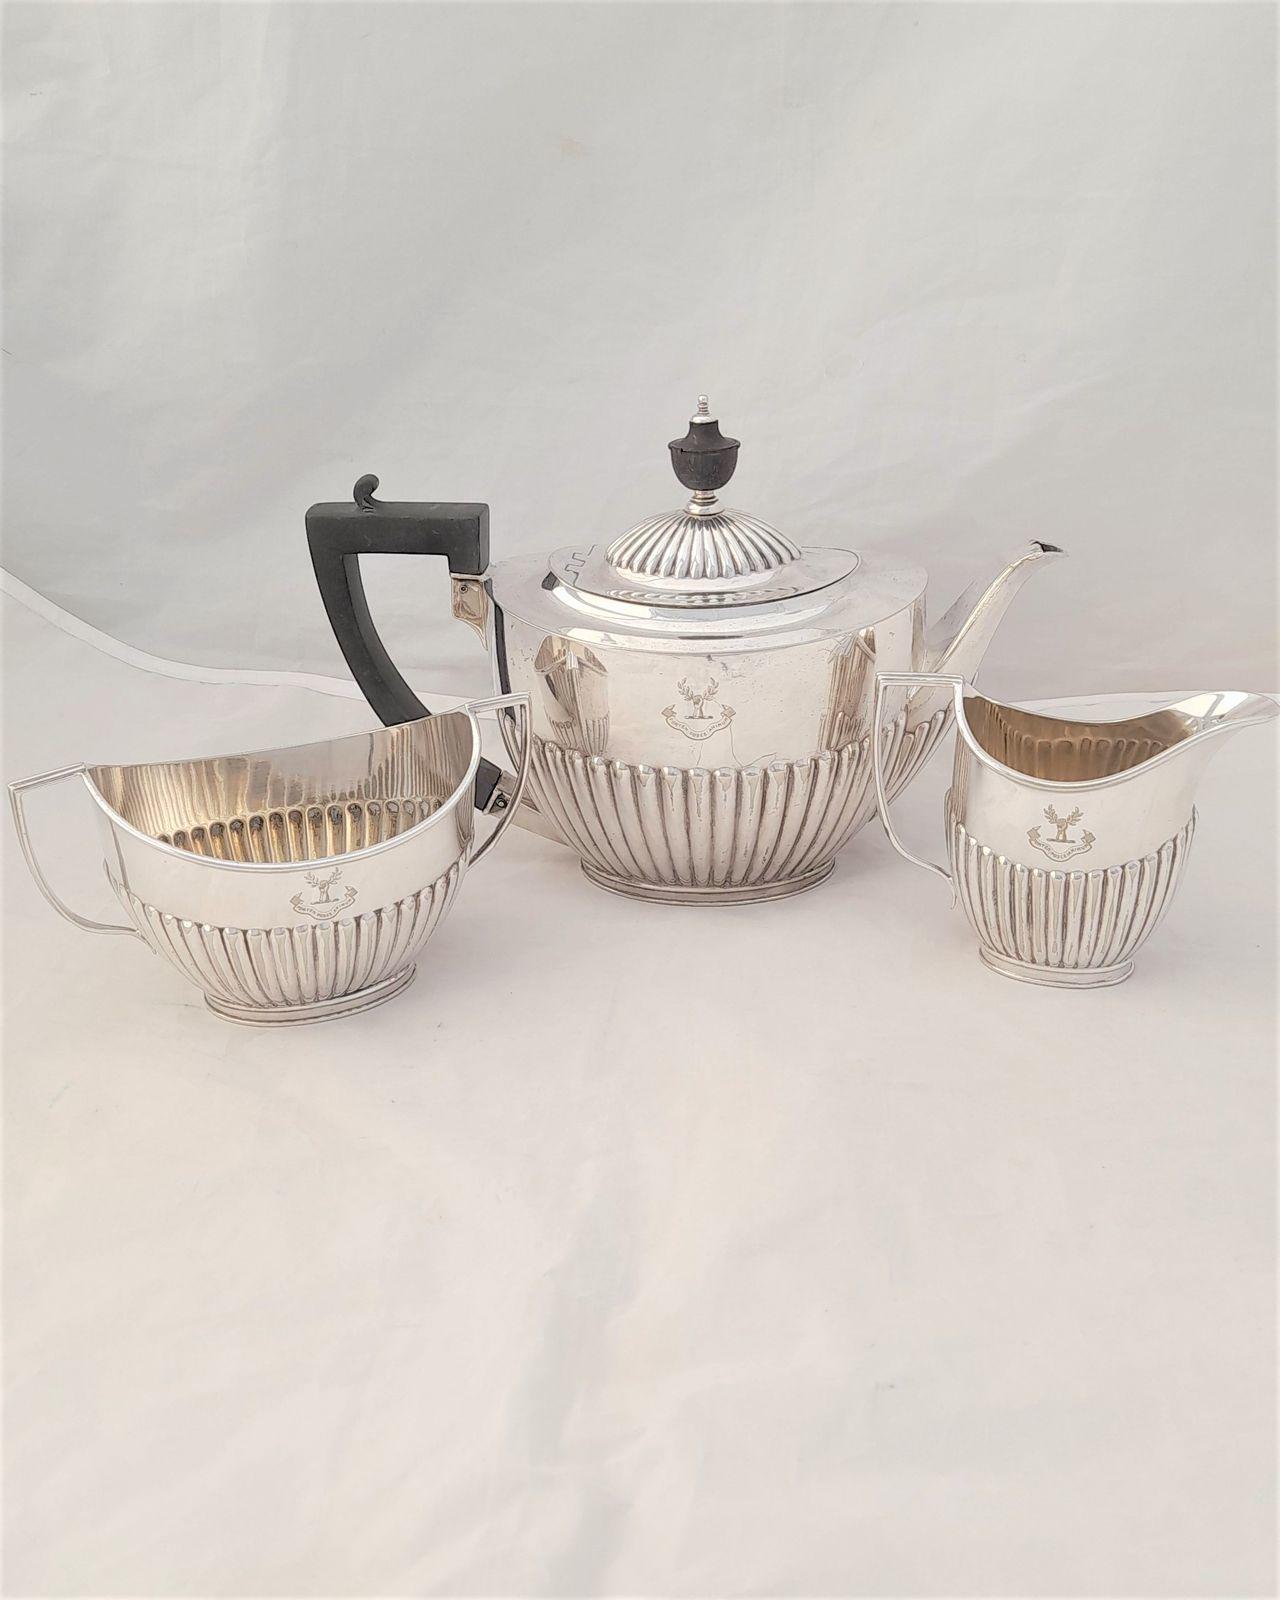 An antique Edwardian silver plated Regent Plate tea service three piece in the new oval shape each item engraved  with the crest for Heriot circa 1905 by the Goldsmiths and Silversmiths Company of 112 Regent Street London.